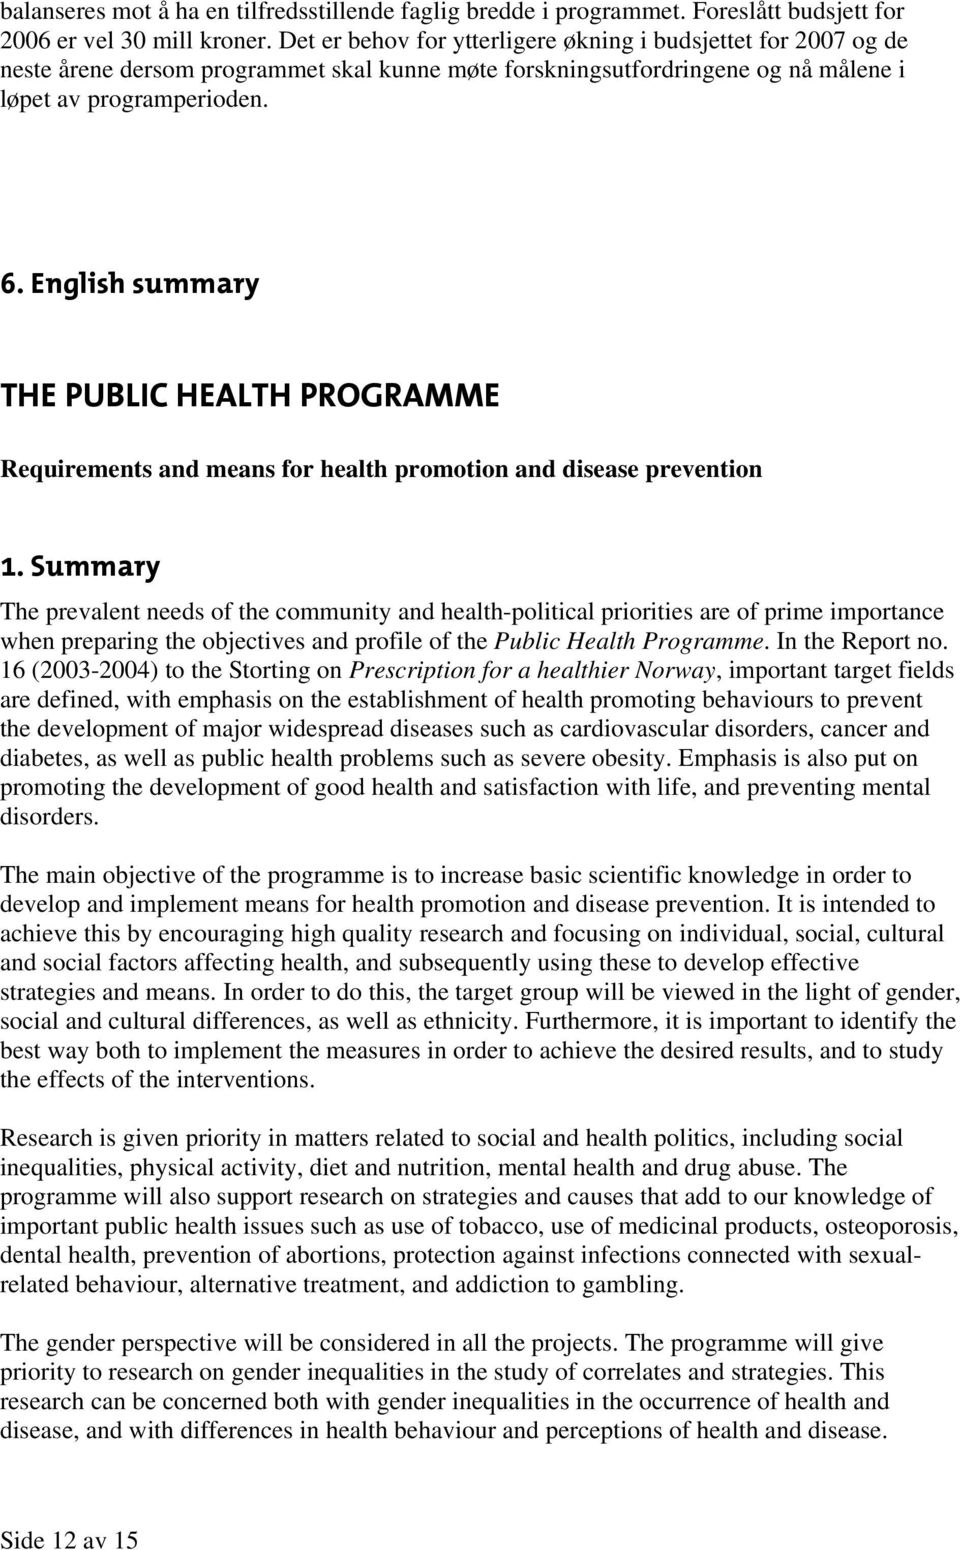 English summary THE PUBLIC HEALTH PROGRAMME Requirements and means for health promotion and disease prevention 1.